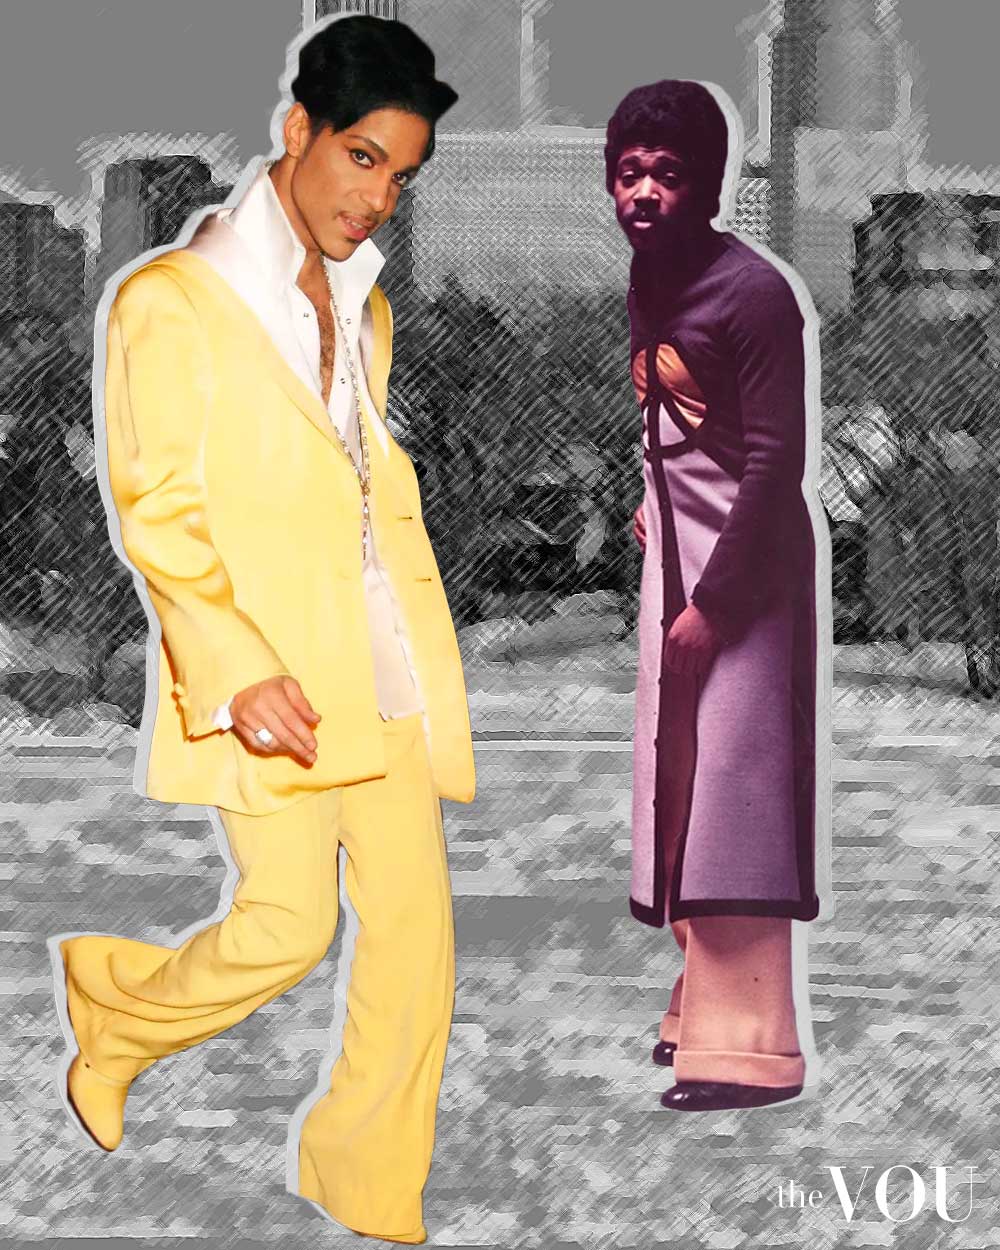 Black celebrity Prince in wide-leg pant style in the 80s fashion